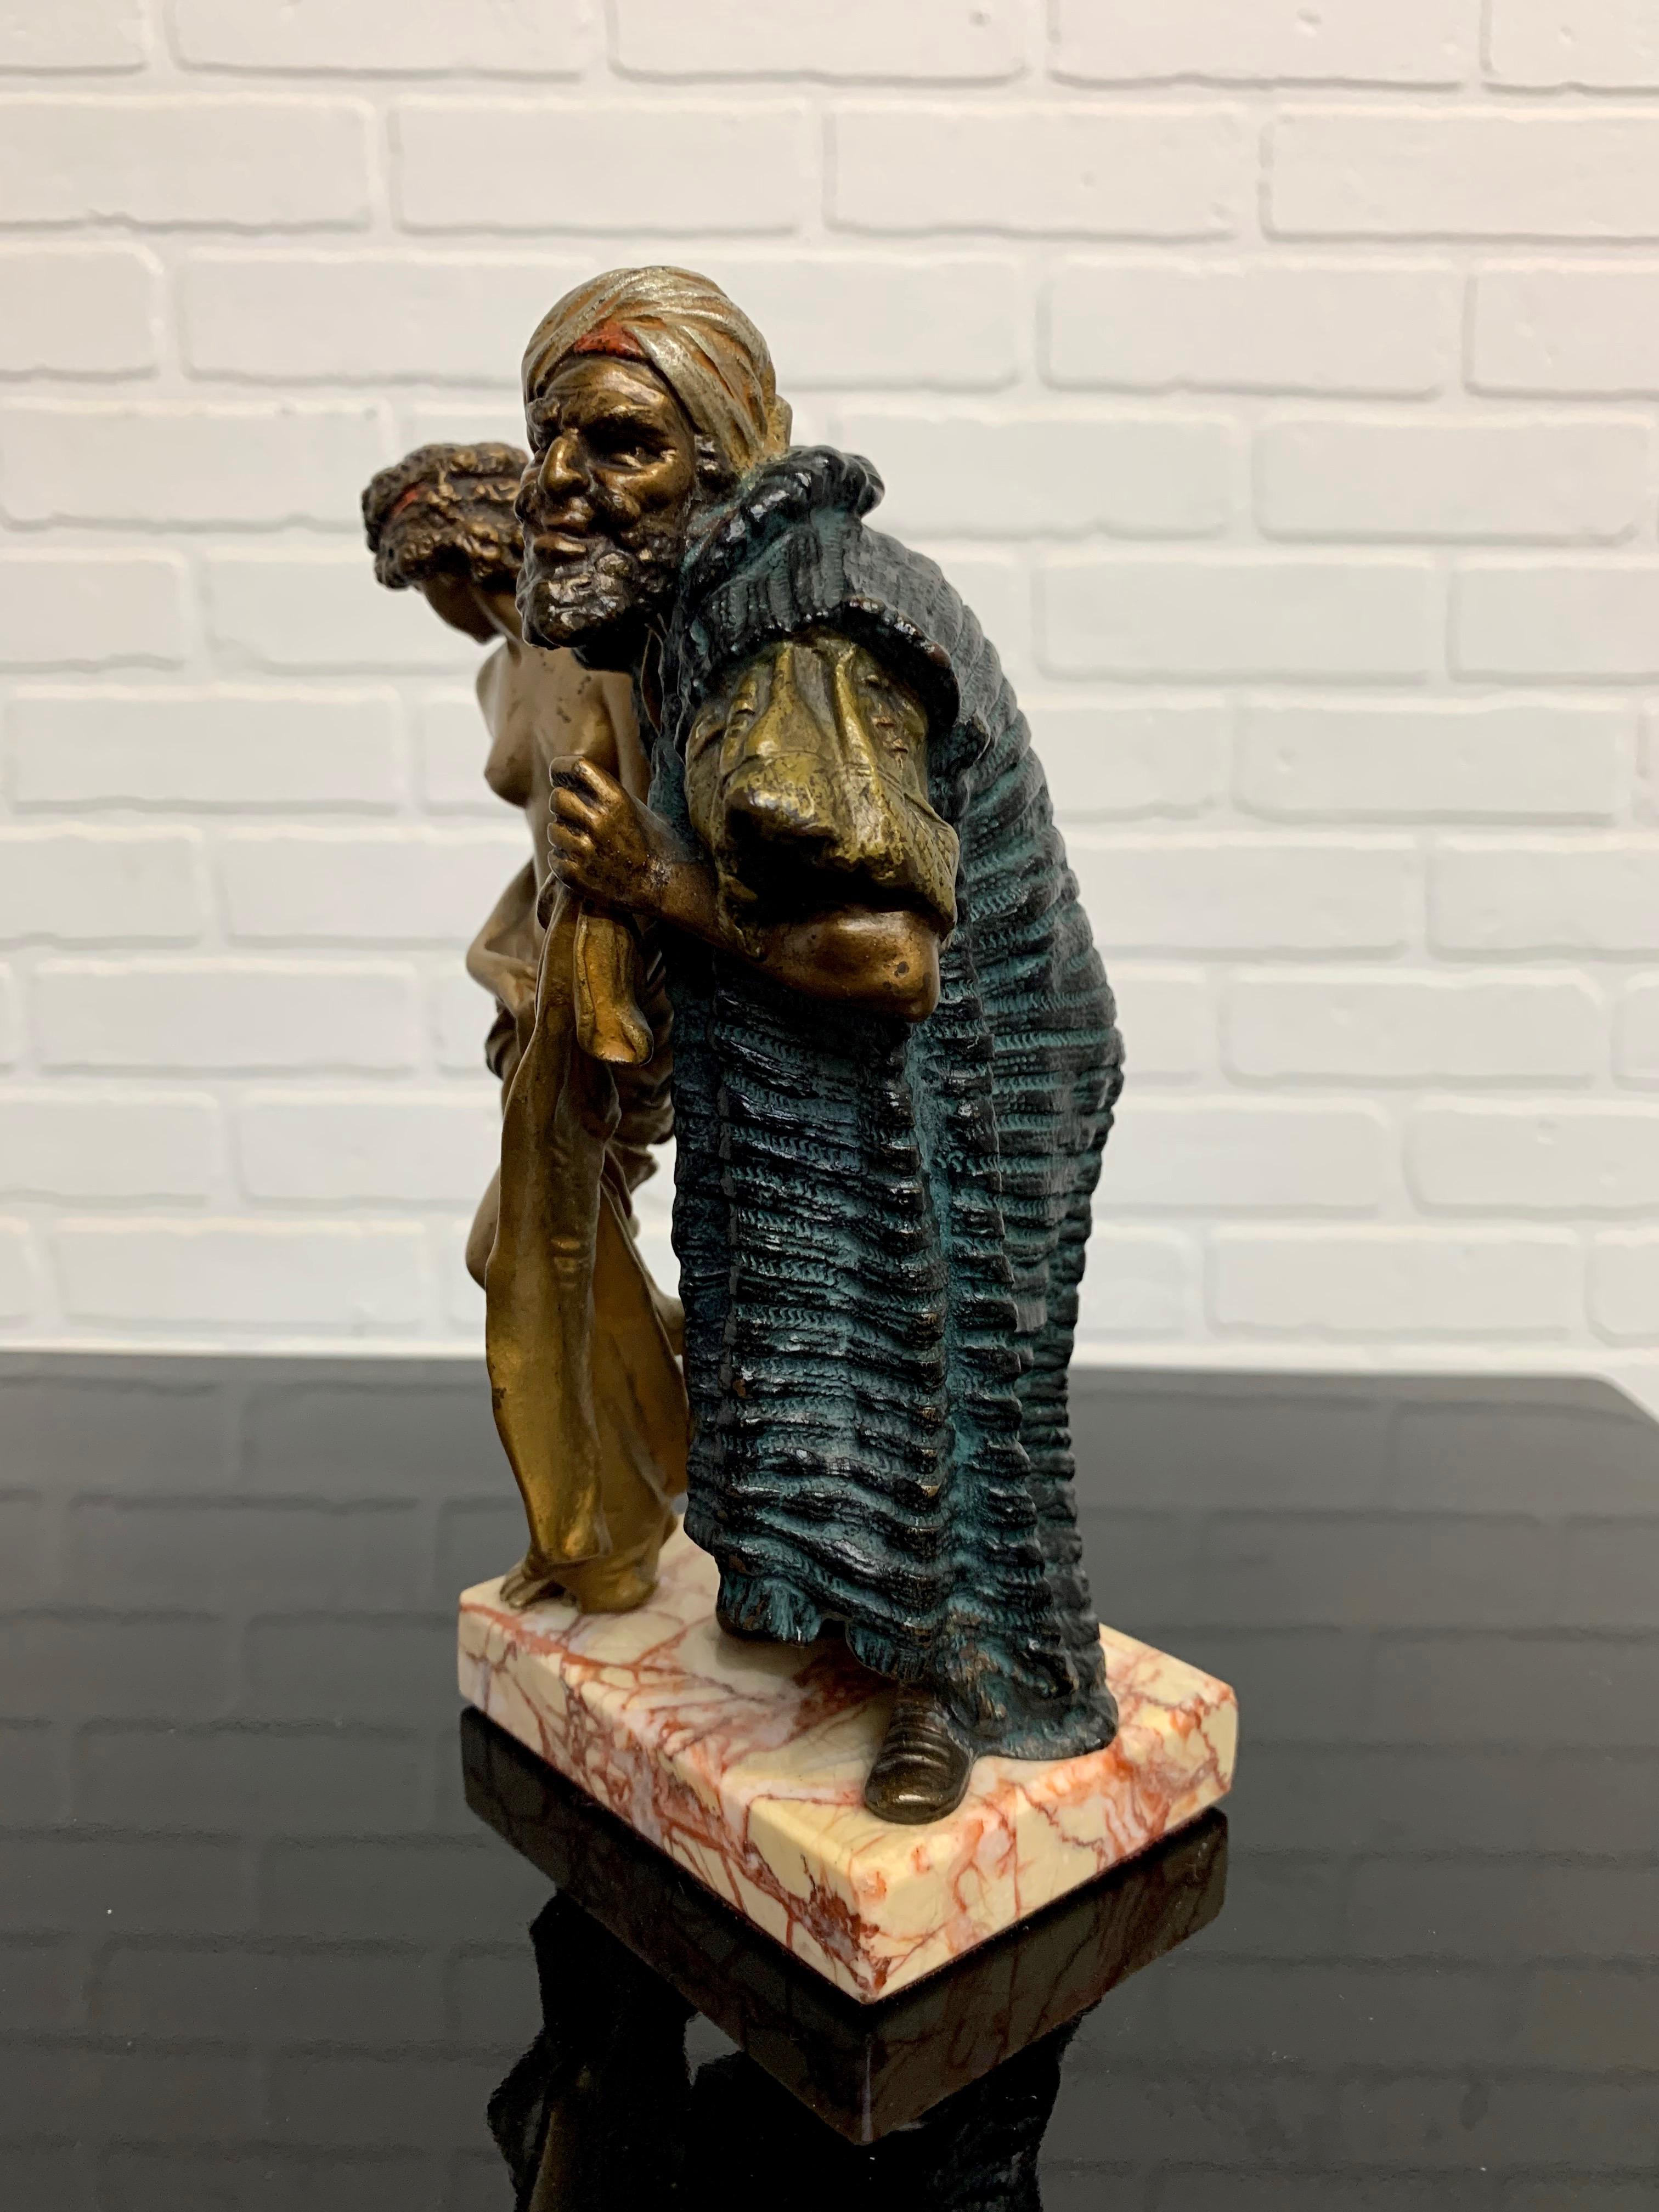 Cold painted orientalist Vienna bronze of a middle eastern man with a women by Franz Bergman. 
On the back of her robe is the B inside of a urn factory mark.